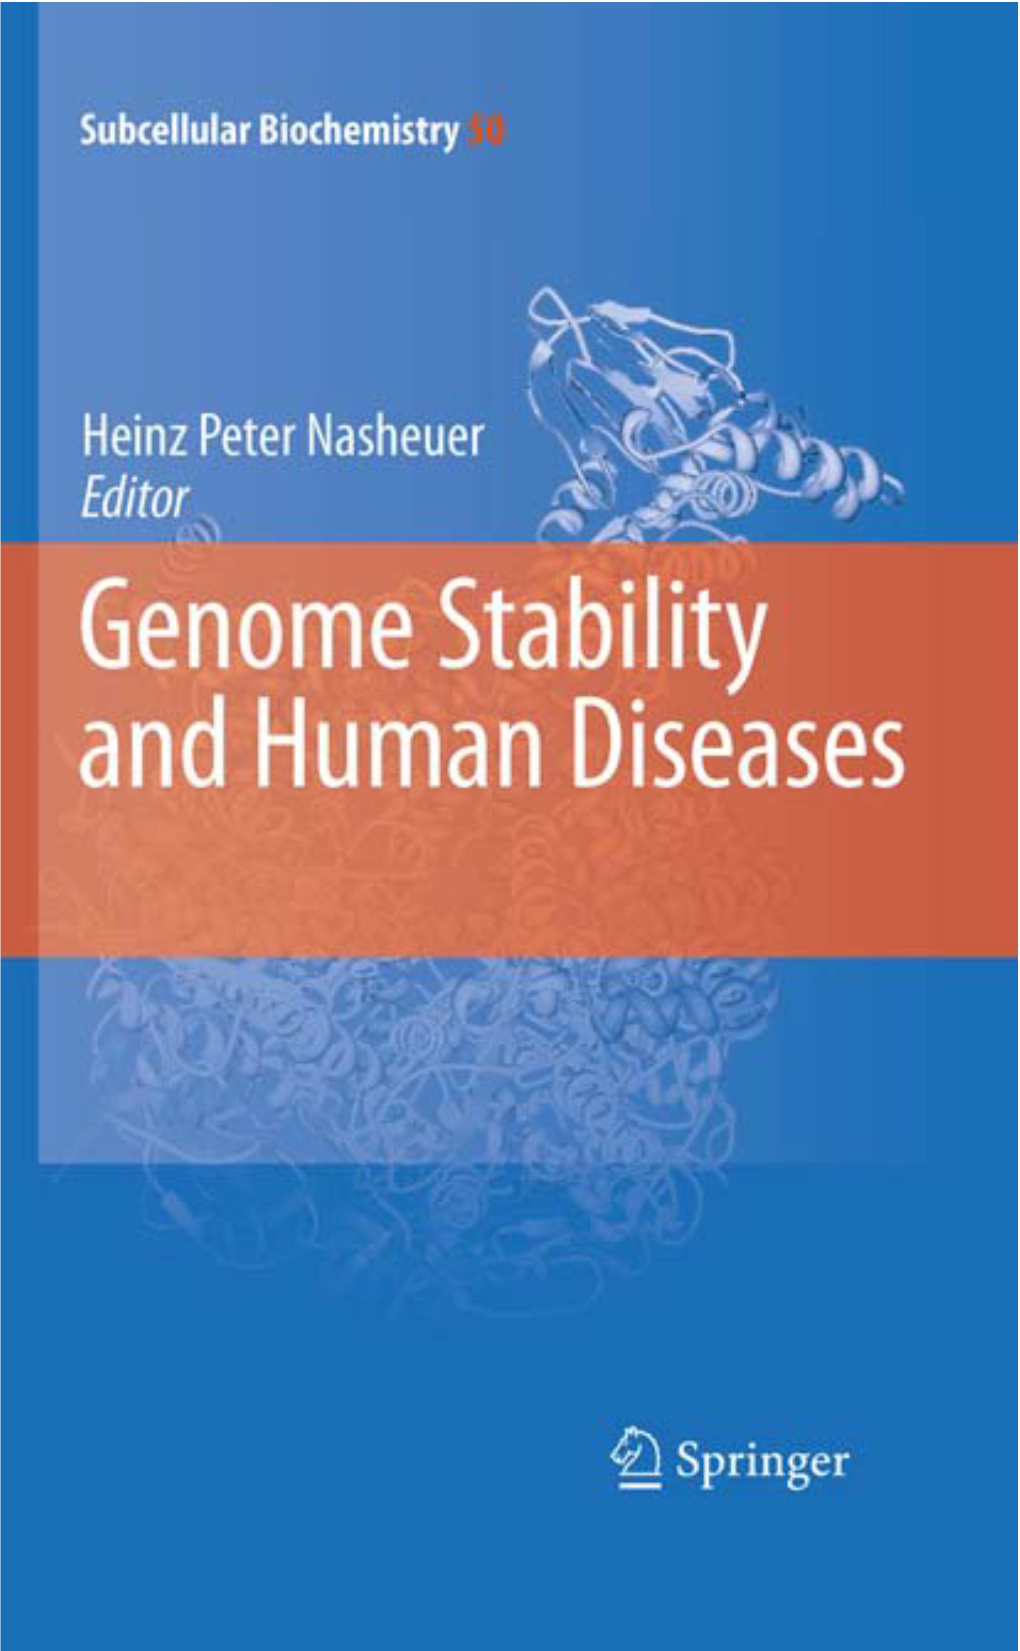 Genome Stability and Human Diseases (Subcellular Biochemistry)